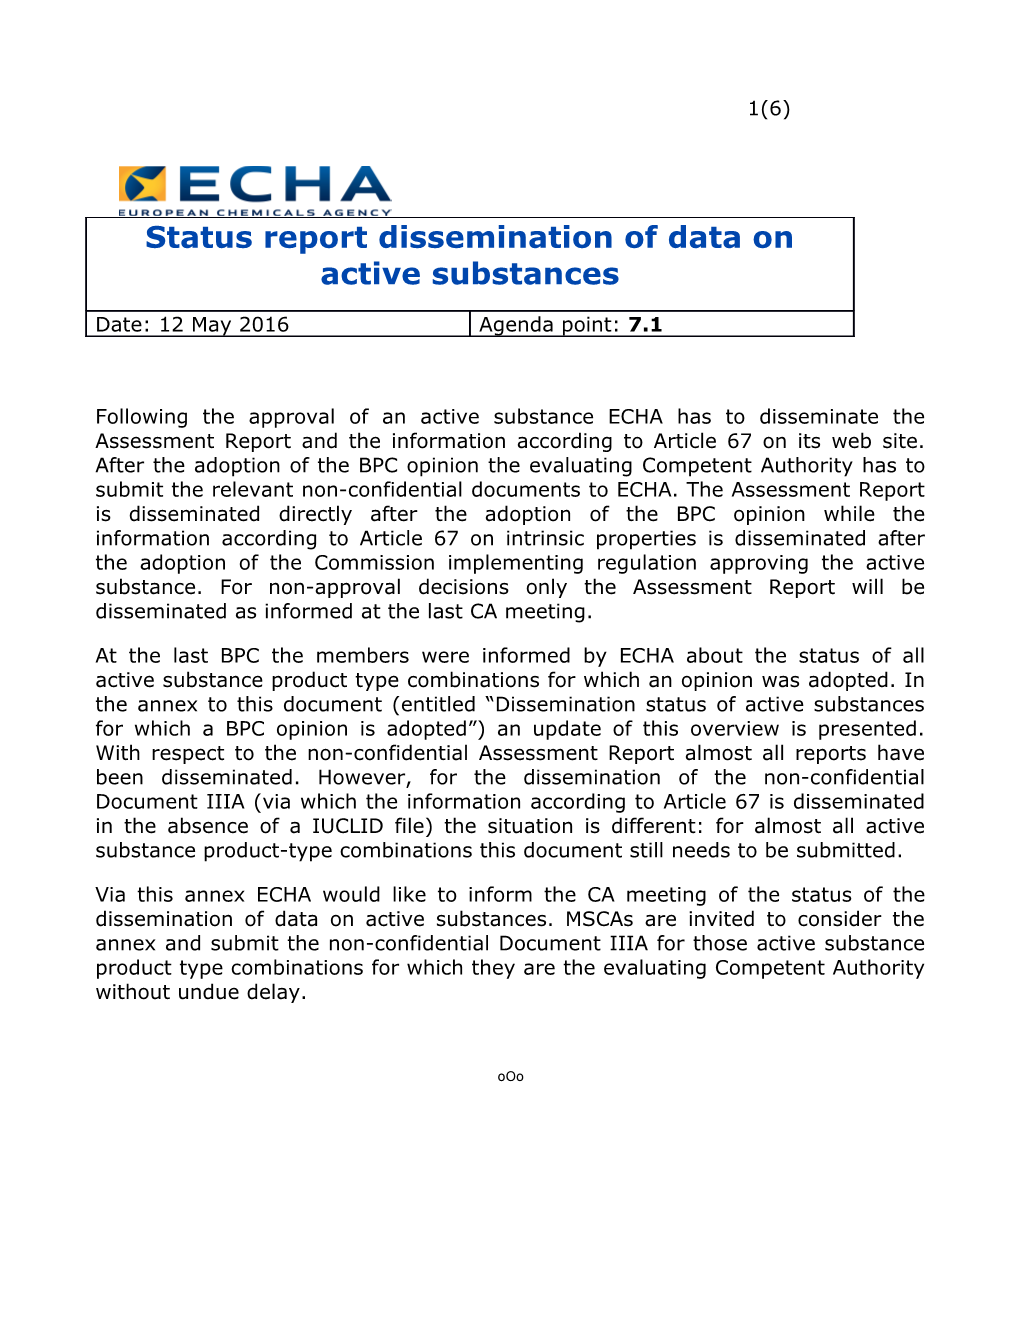 At the Last BPC the Members Were Informed by ECHA About the Status of All Active Substance